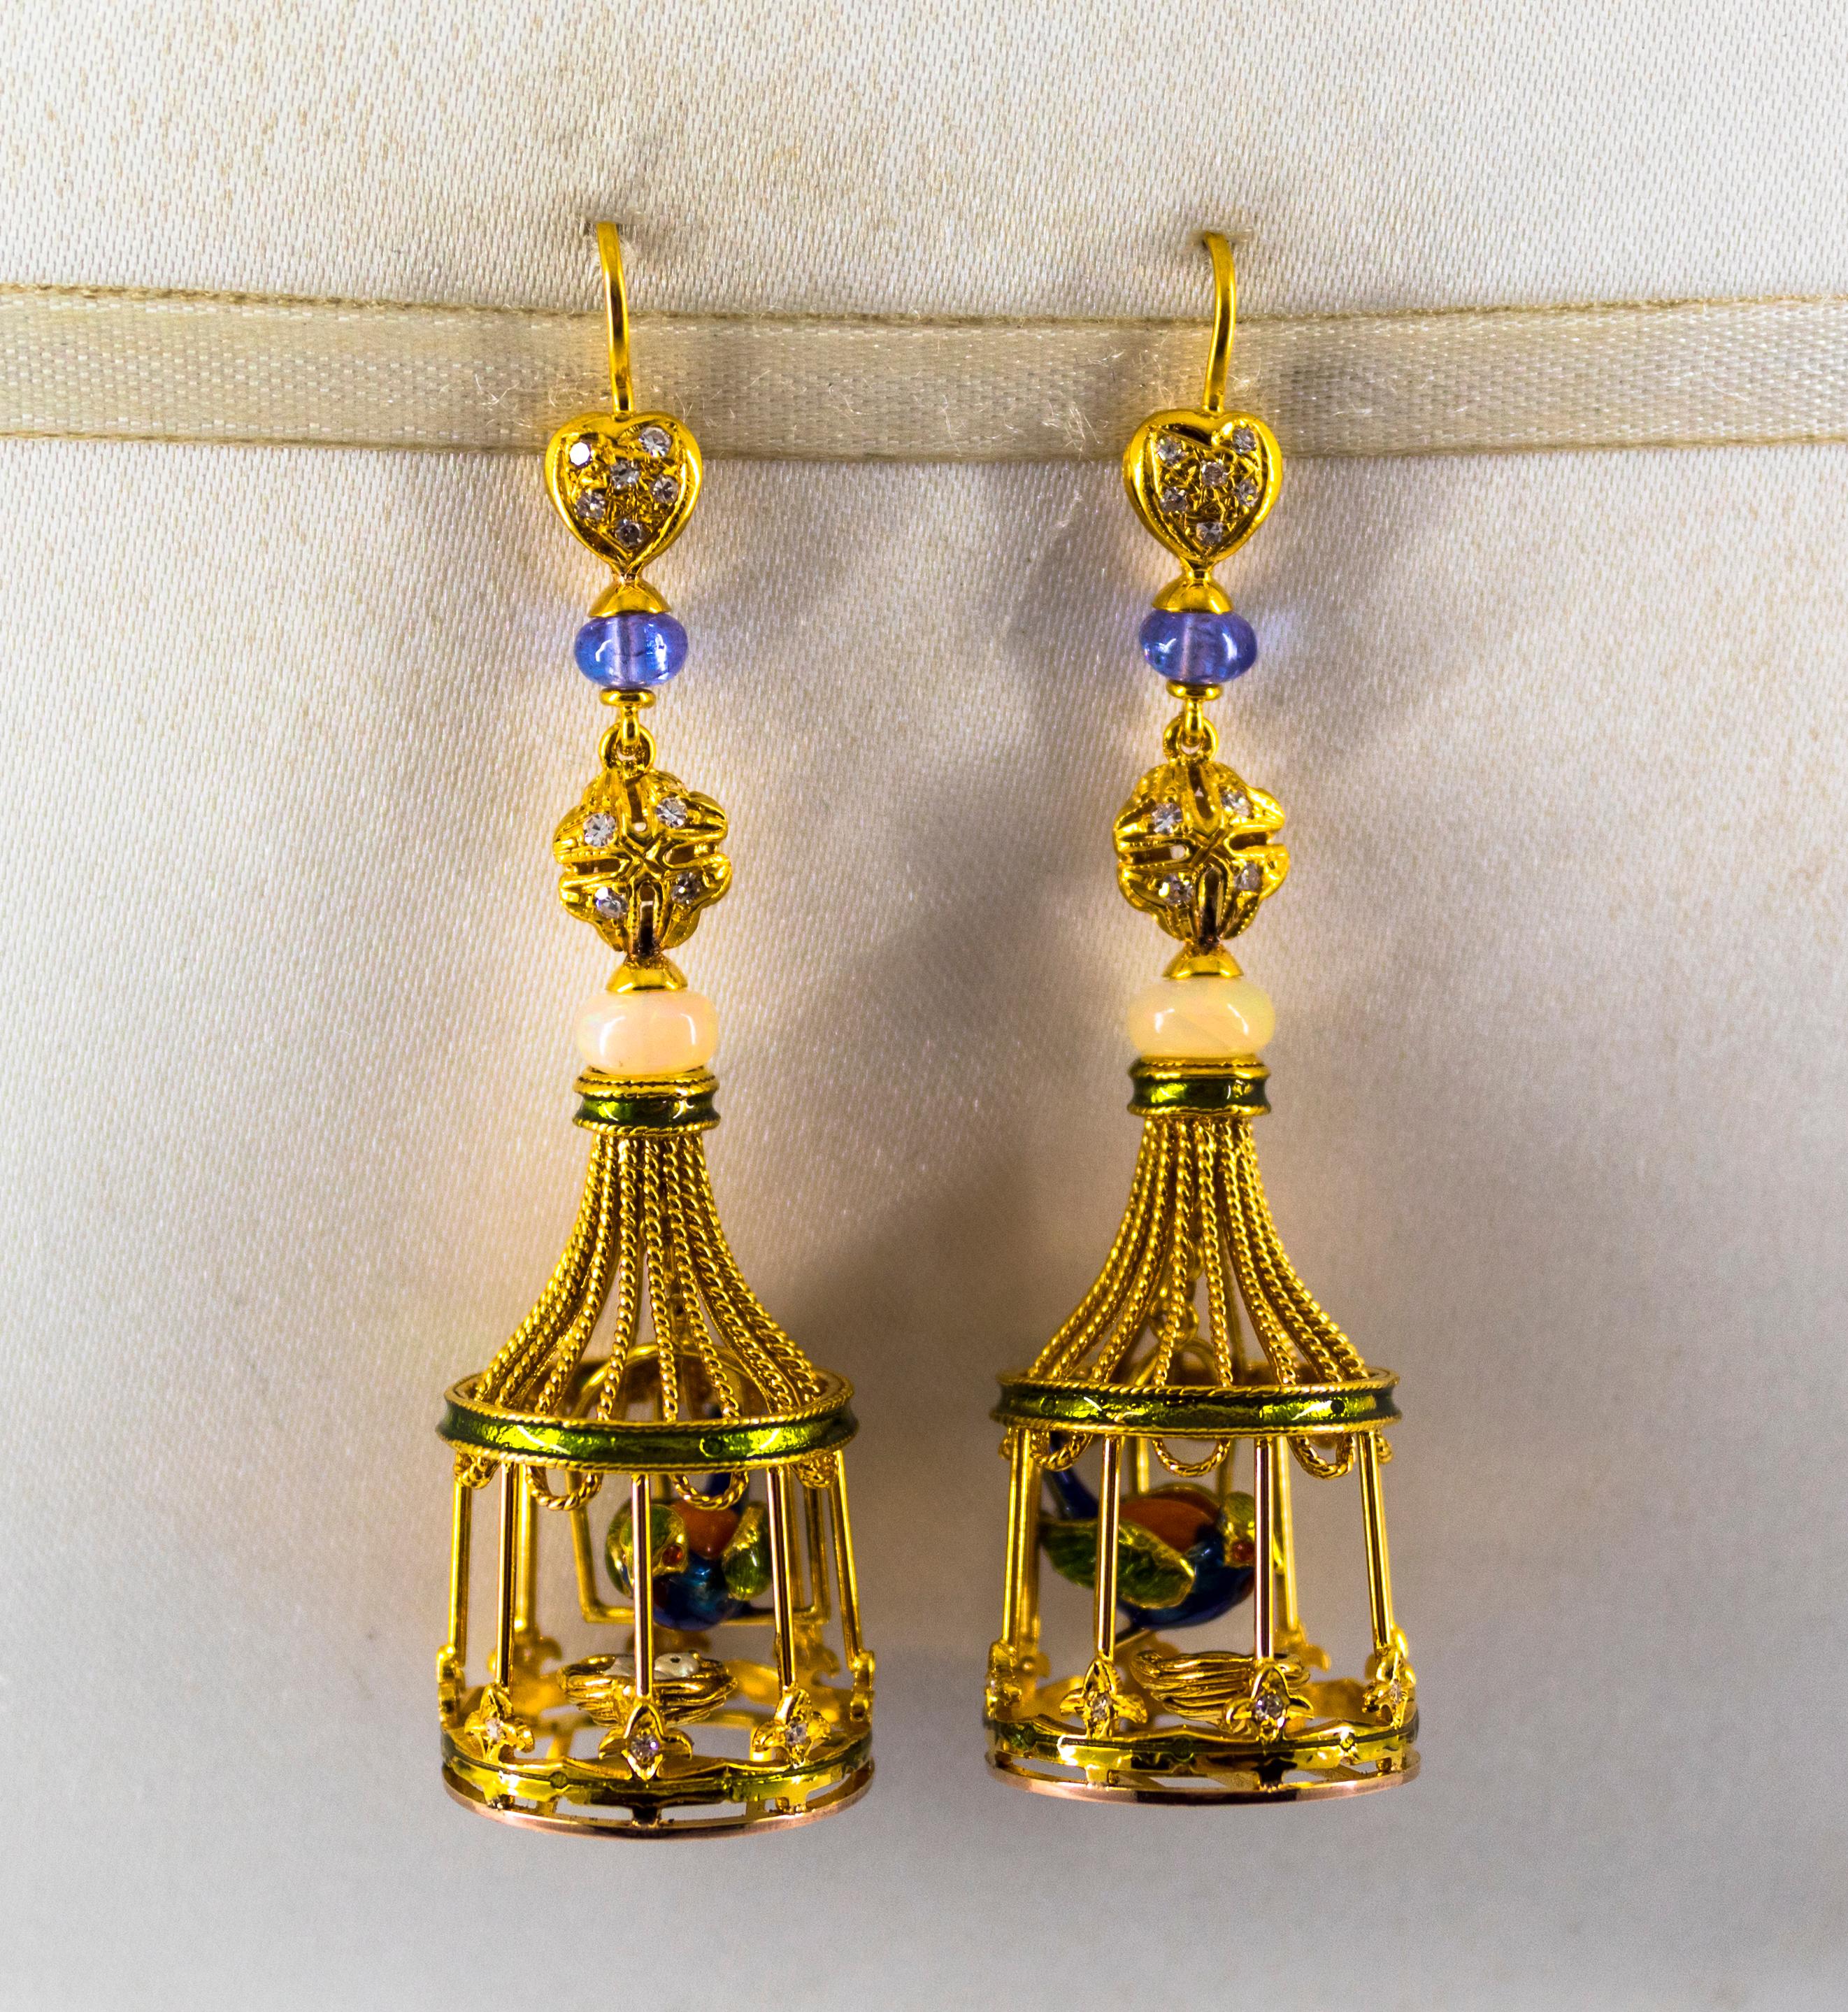 These Stud Earrings are made of 9K Yellow Gold.
These Earrings have 0.40 Carats of White Diamonds.
These Earrings have Opal and Tanzanite.
These Earrings have also Coral, Enamel and Pearls.
All our Earrings have pins for pierced ears but we can